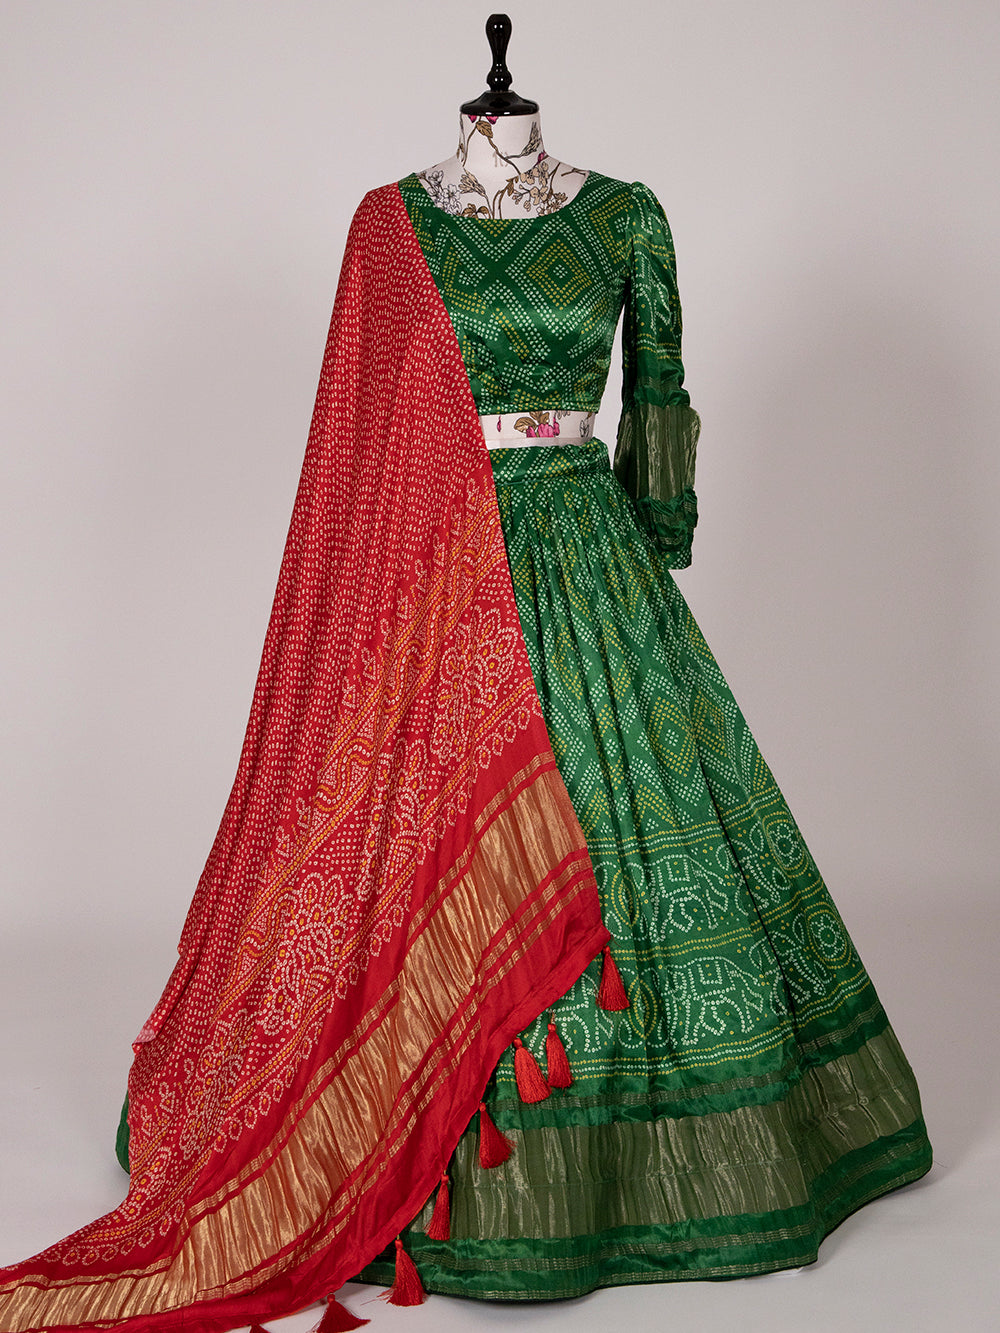 Red and Green Color Wedding lehenga | Indian bridal outfits, Indian bridal  dress, Wedding lehenga designs